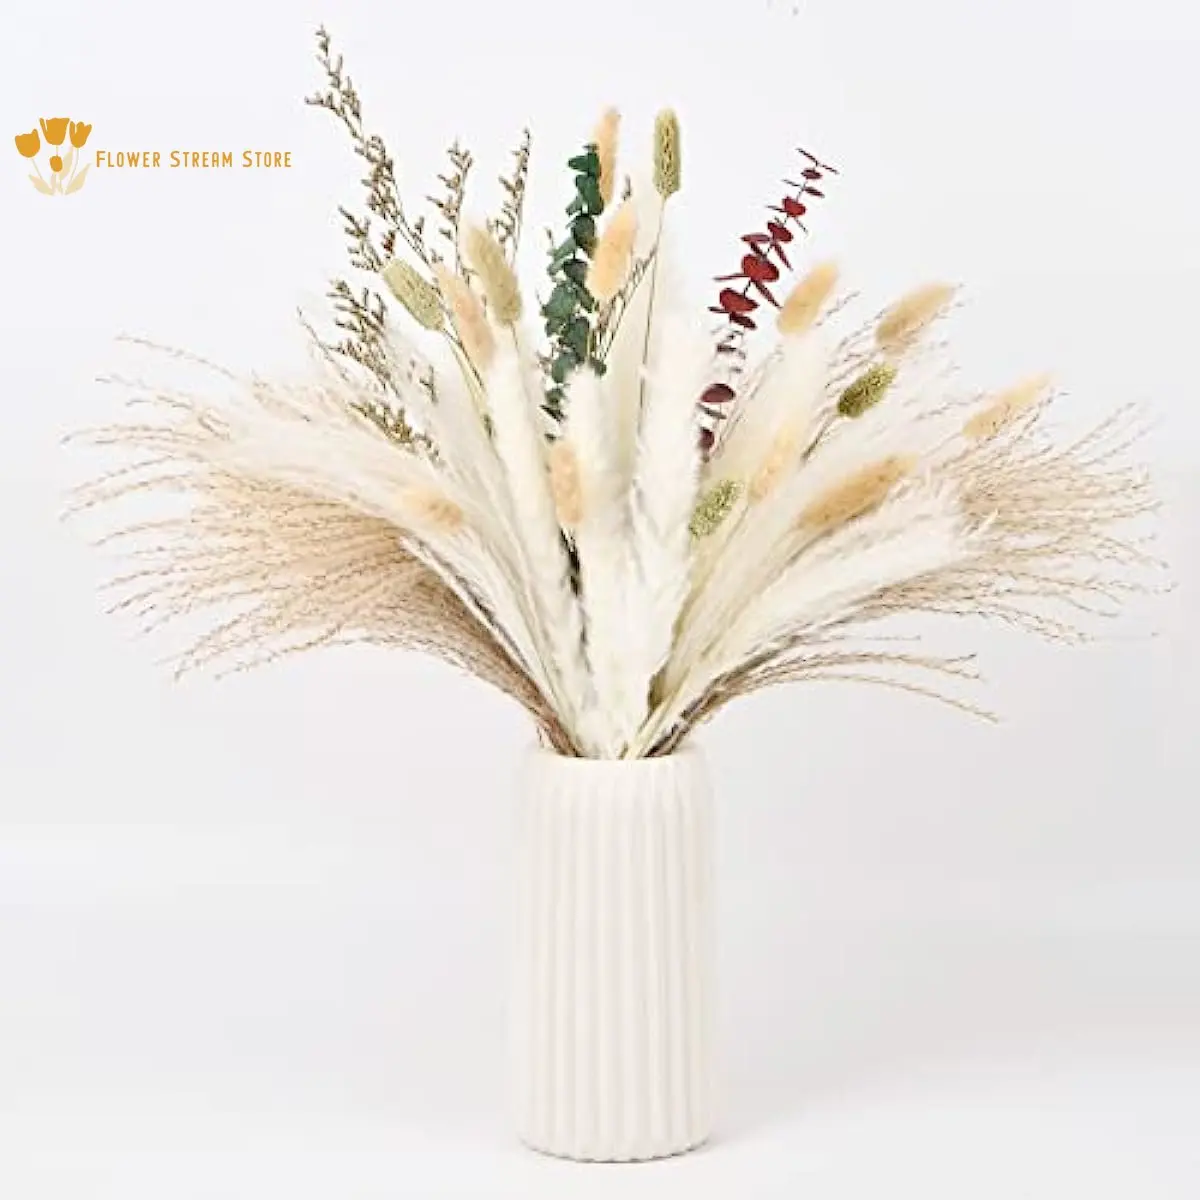 

90Pcs Fluffy Pampas Grass Dried Flower Bouquet Wedding Decoration Bunny Tails Grass Real Reed Boho Home Farmhouse Rustic Decor